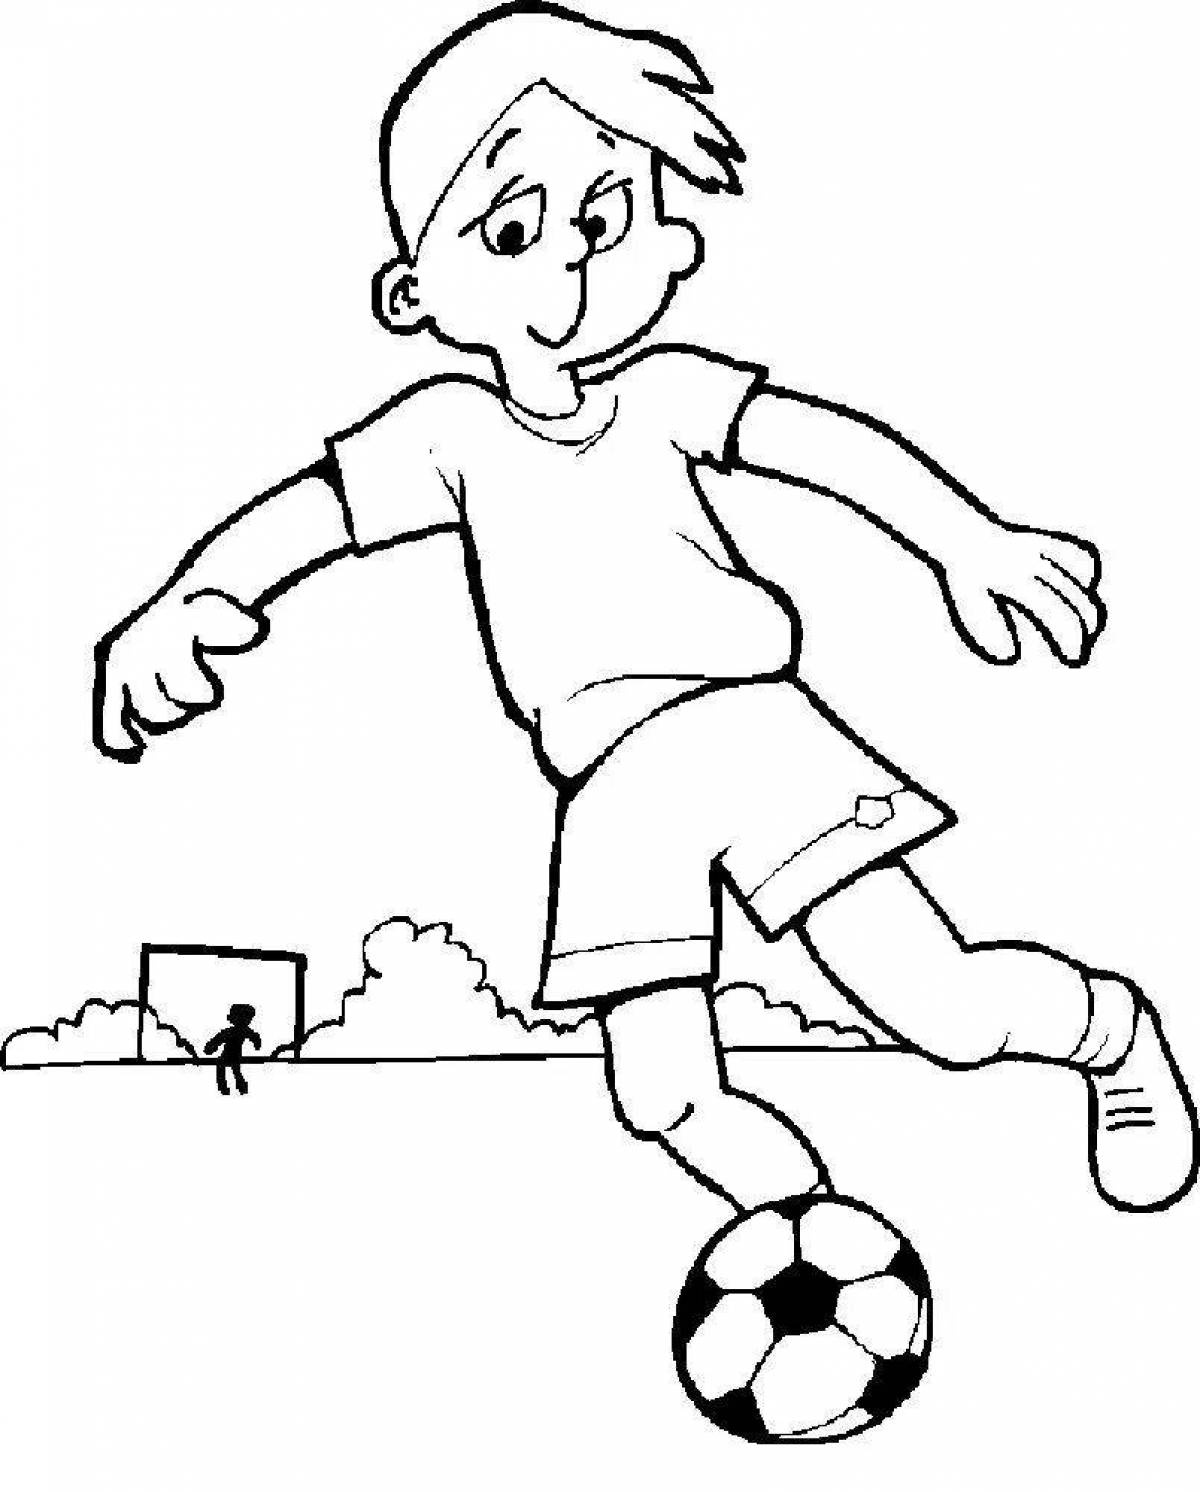 Stimulating football coloring book for kids